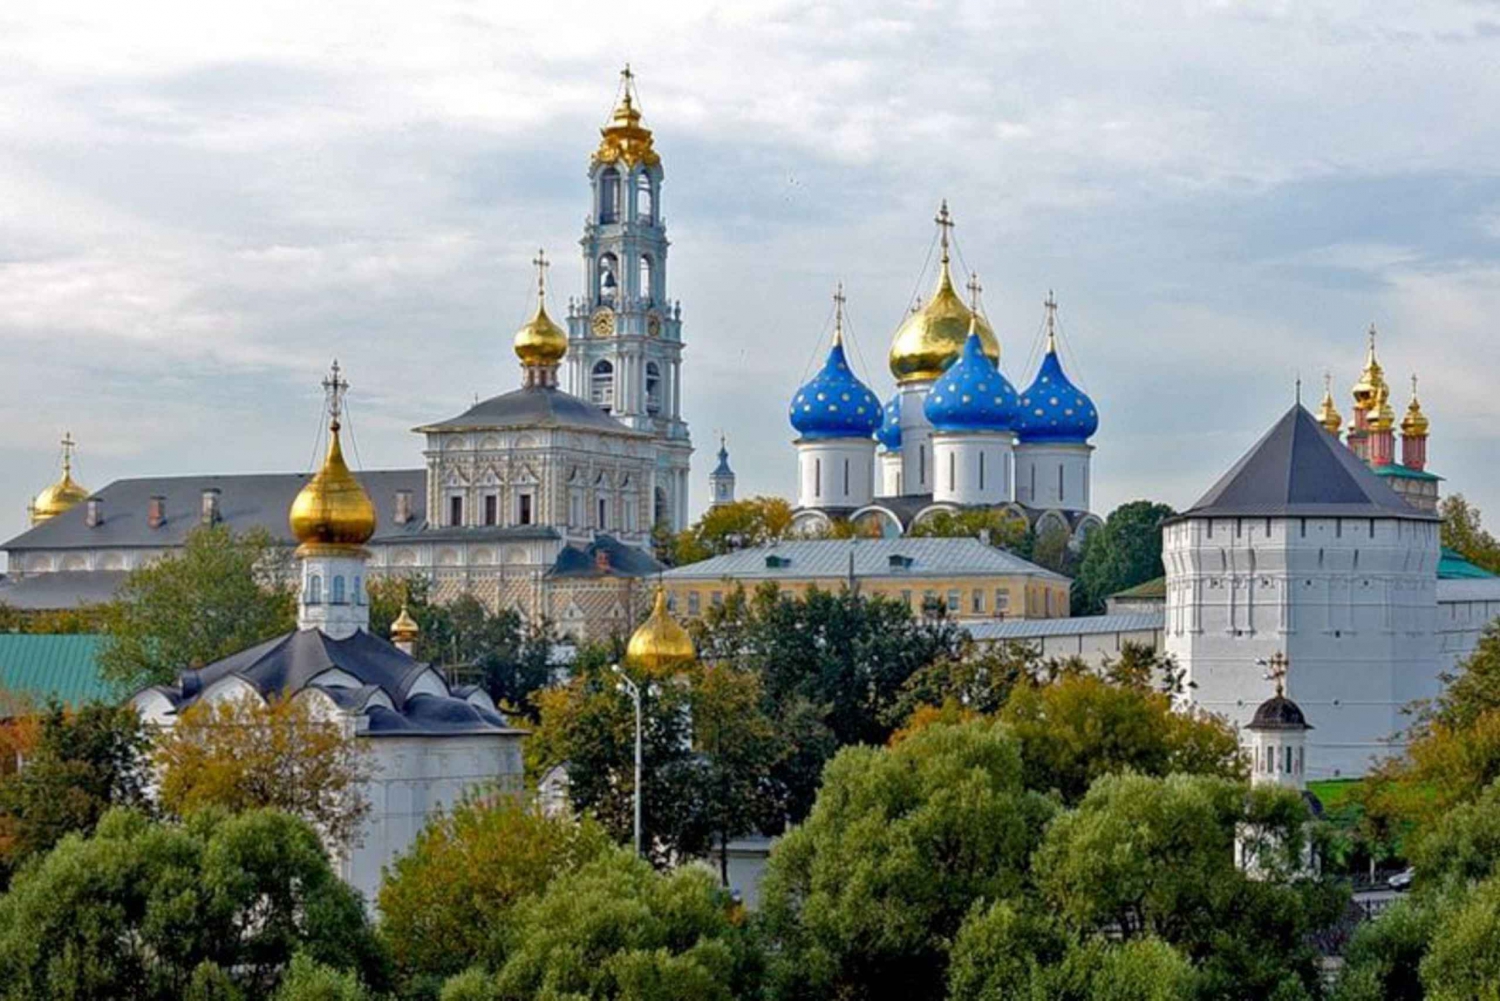 Sergiev Posad from Moscow